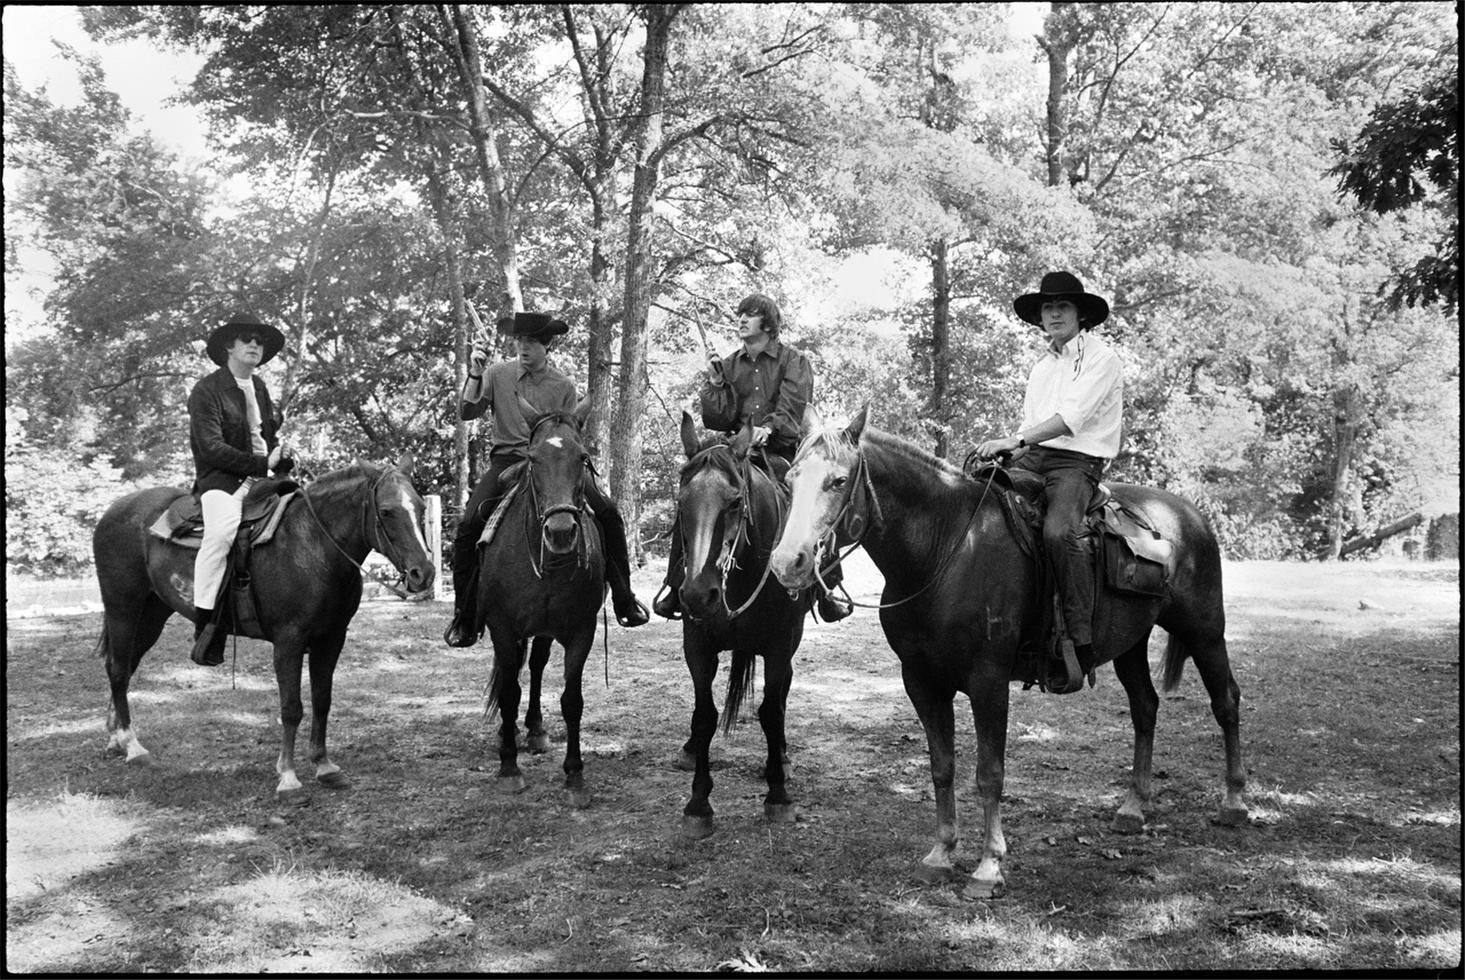 Curt Gunther Black and White Photograph - Beatles On Horses